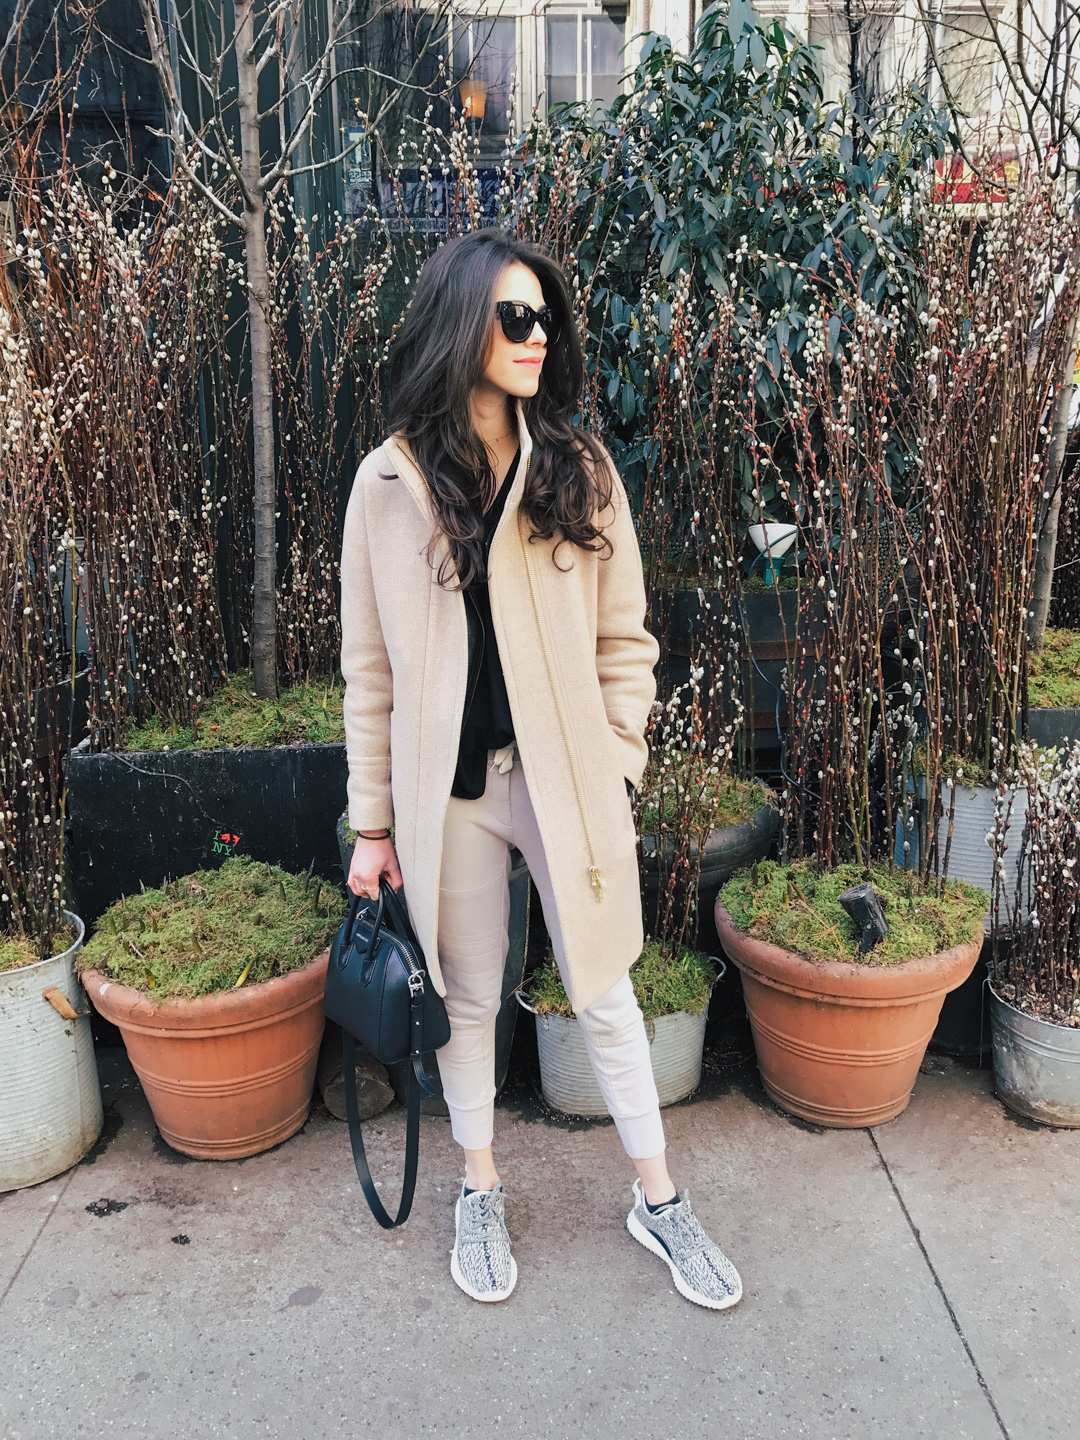 Jackie Roque styling a J.Crew cocoon coat in NYC